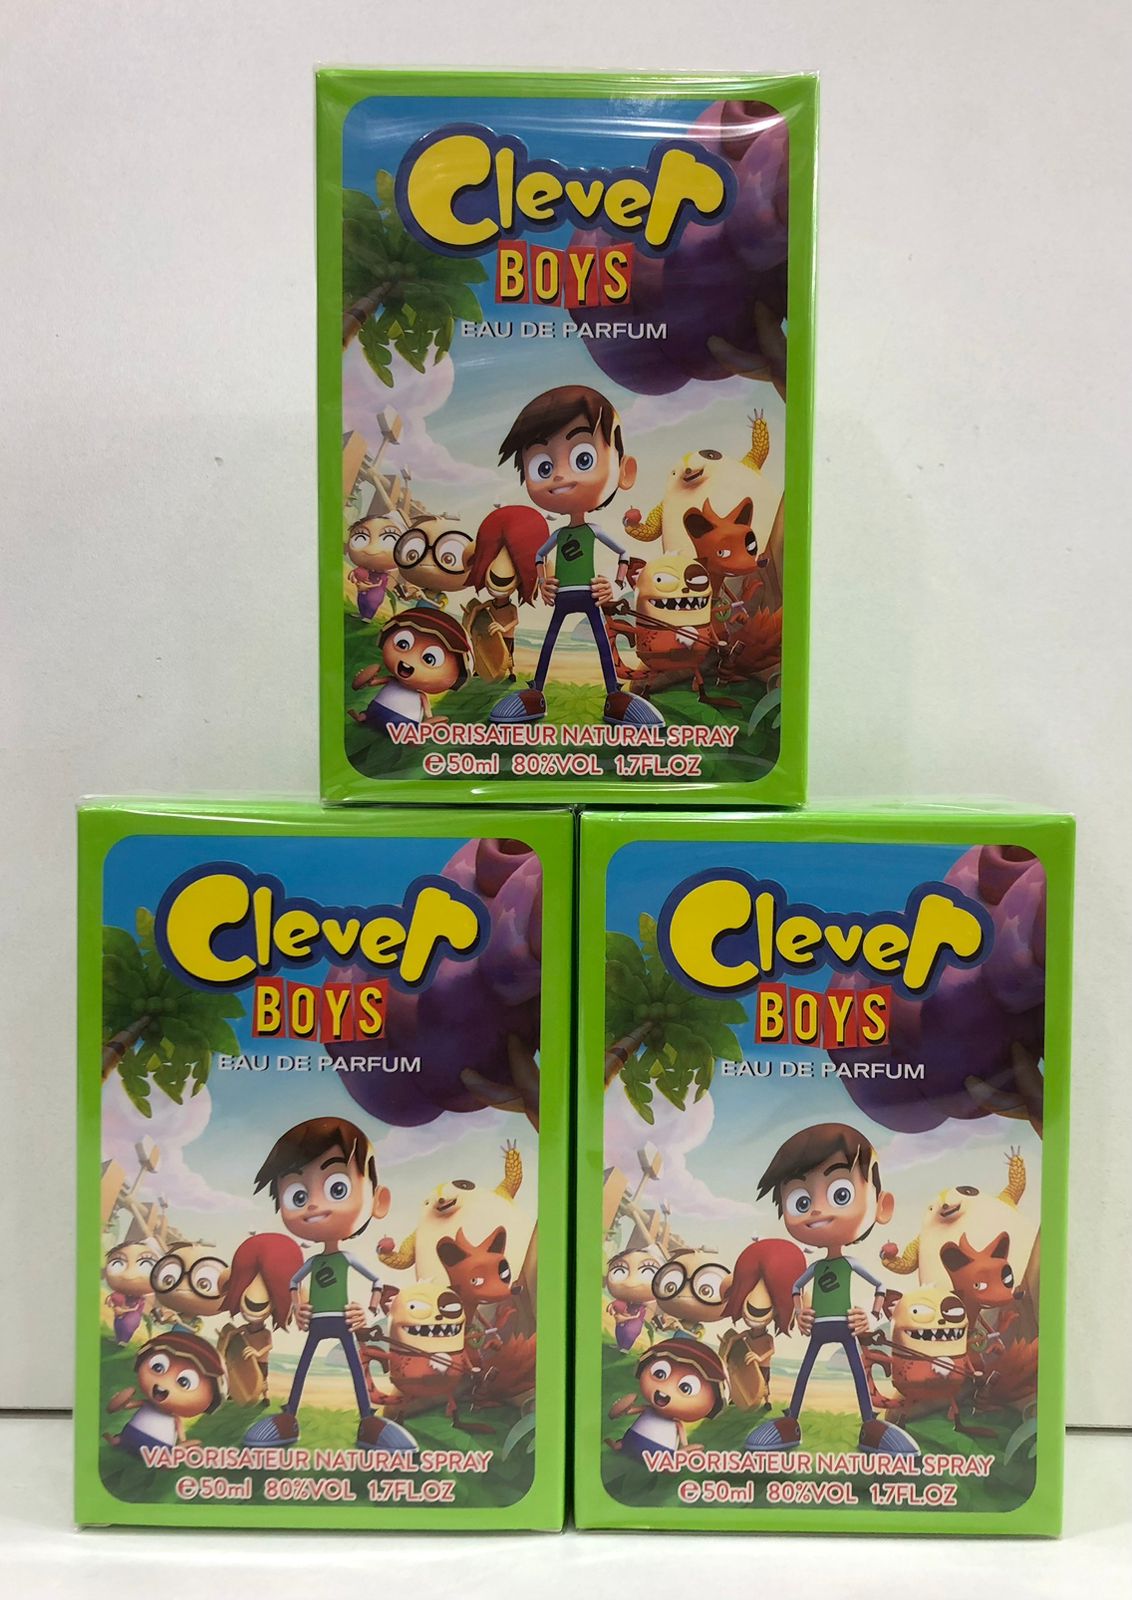 Clever Boys EDP